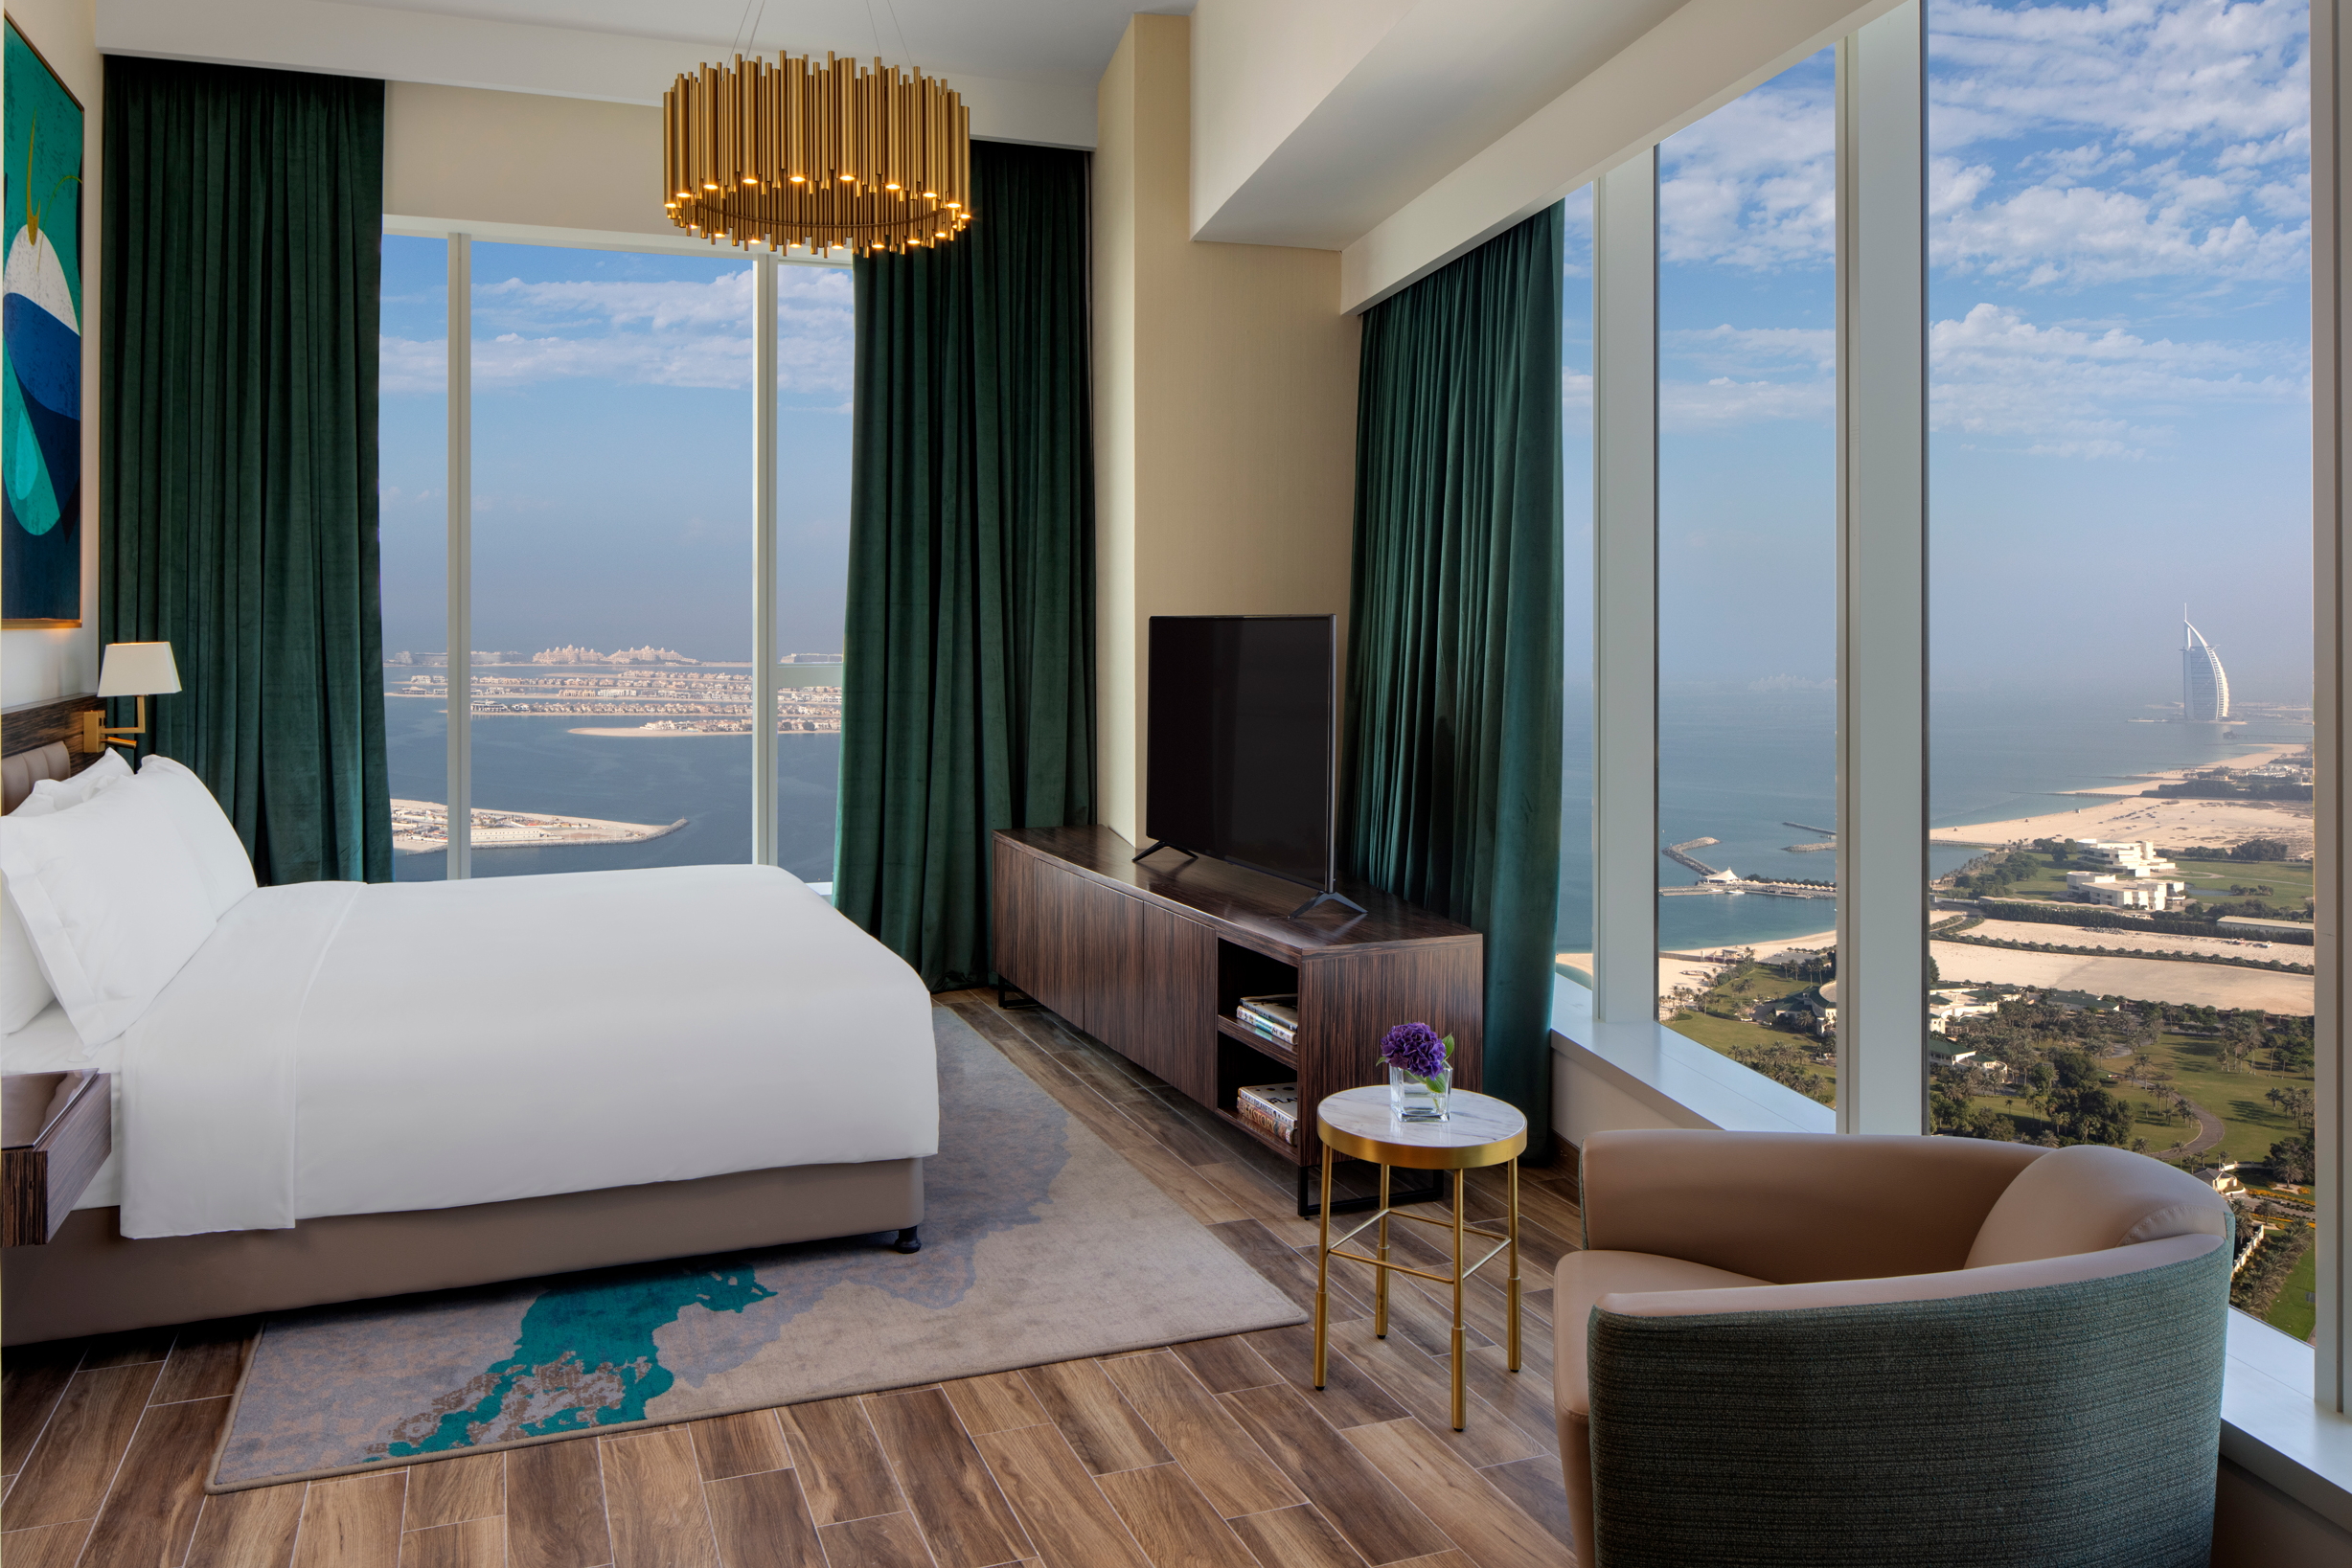 Cool view from a bedroom of a 3-bedroom apartment at the Avani Palm View Dubai Hotel & Suites. Click to enlarge.